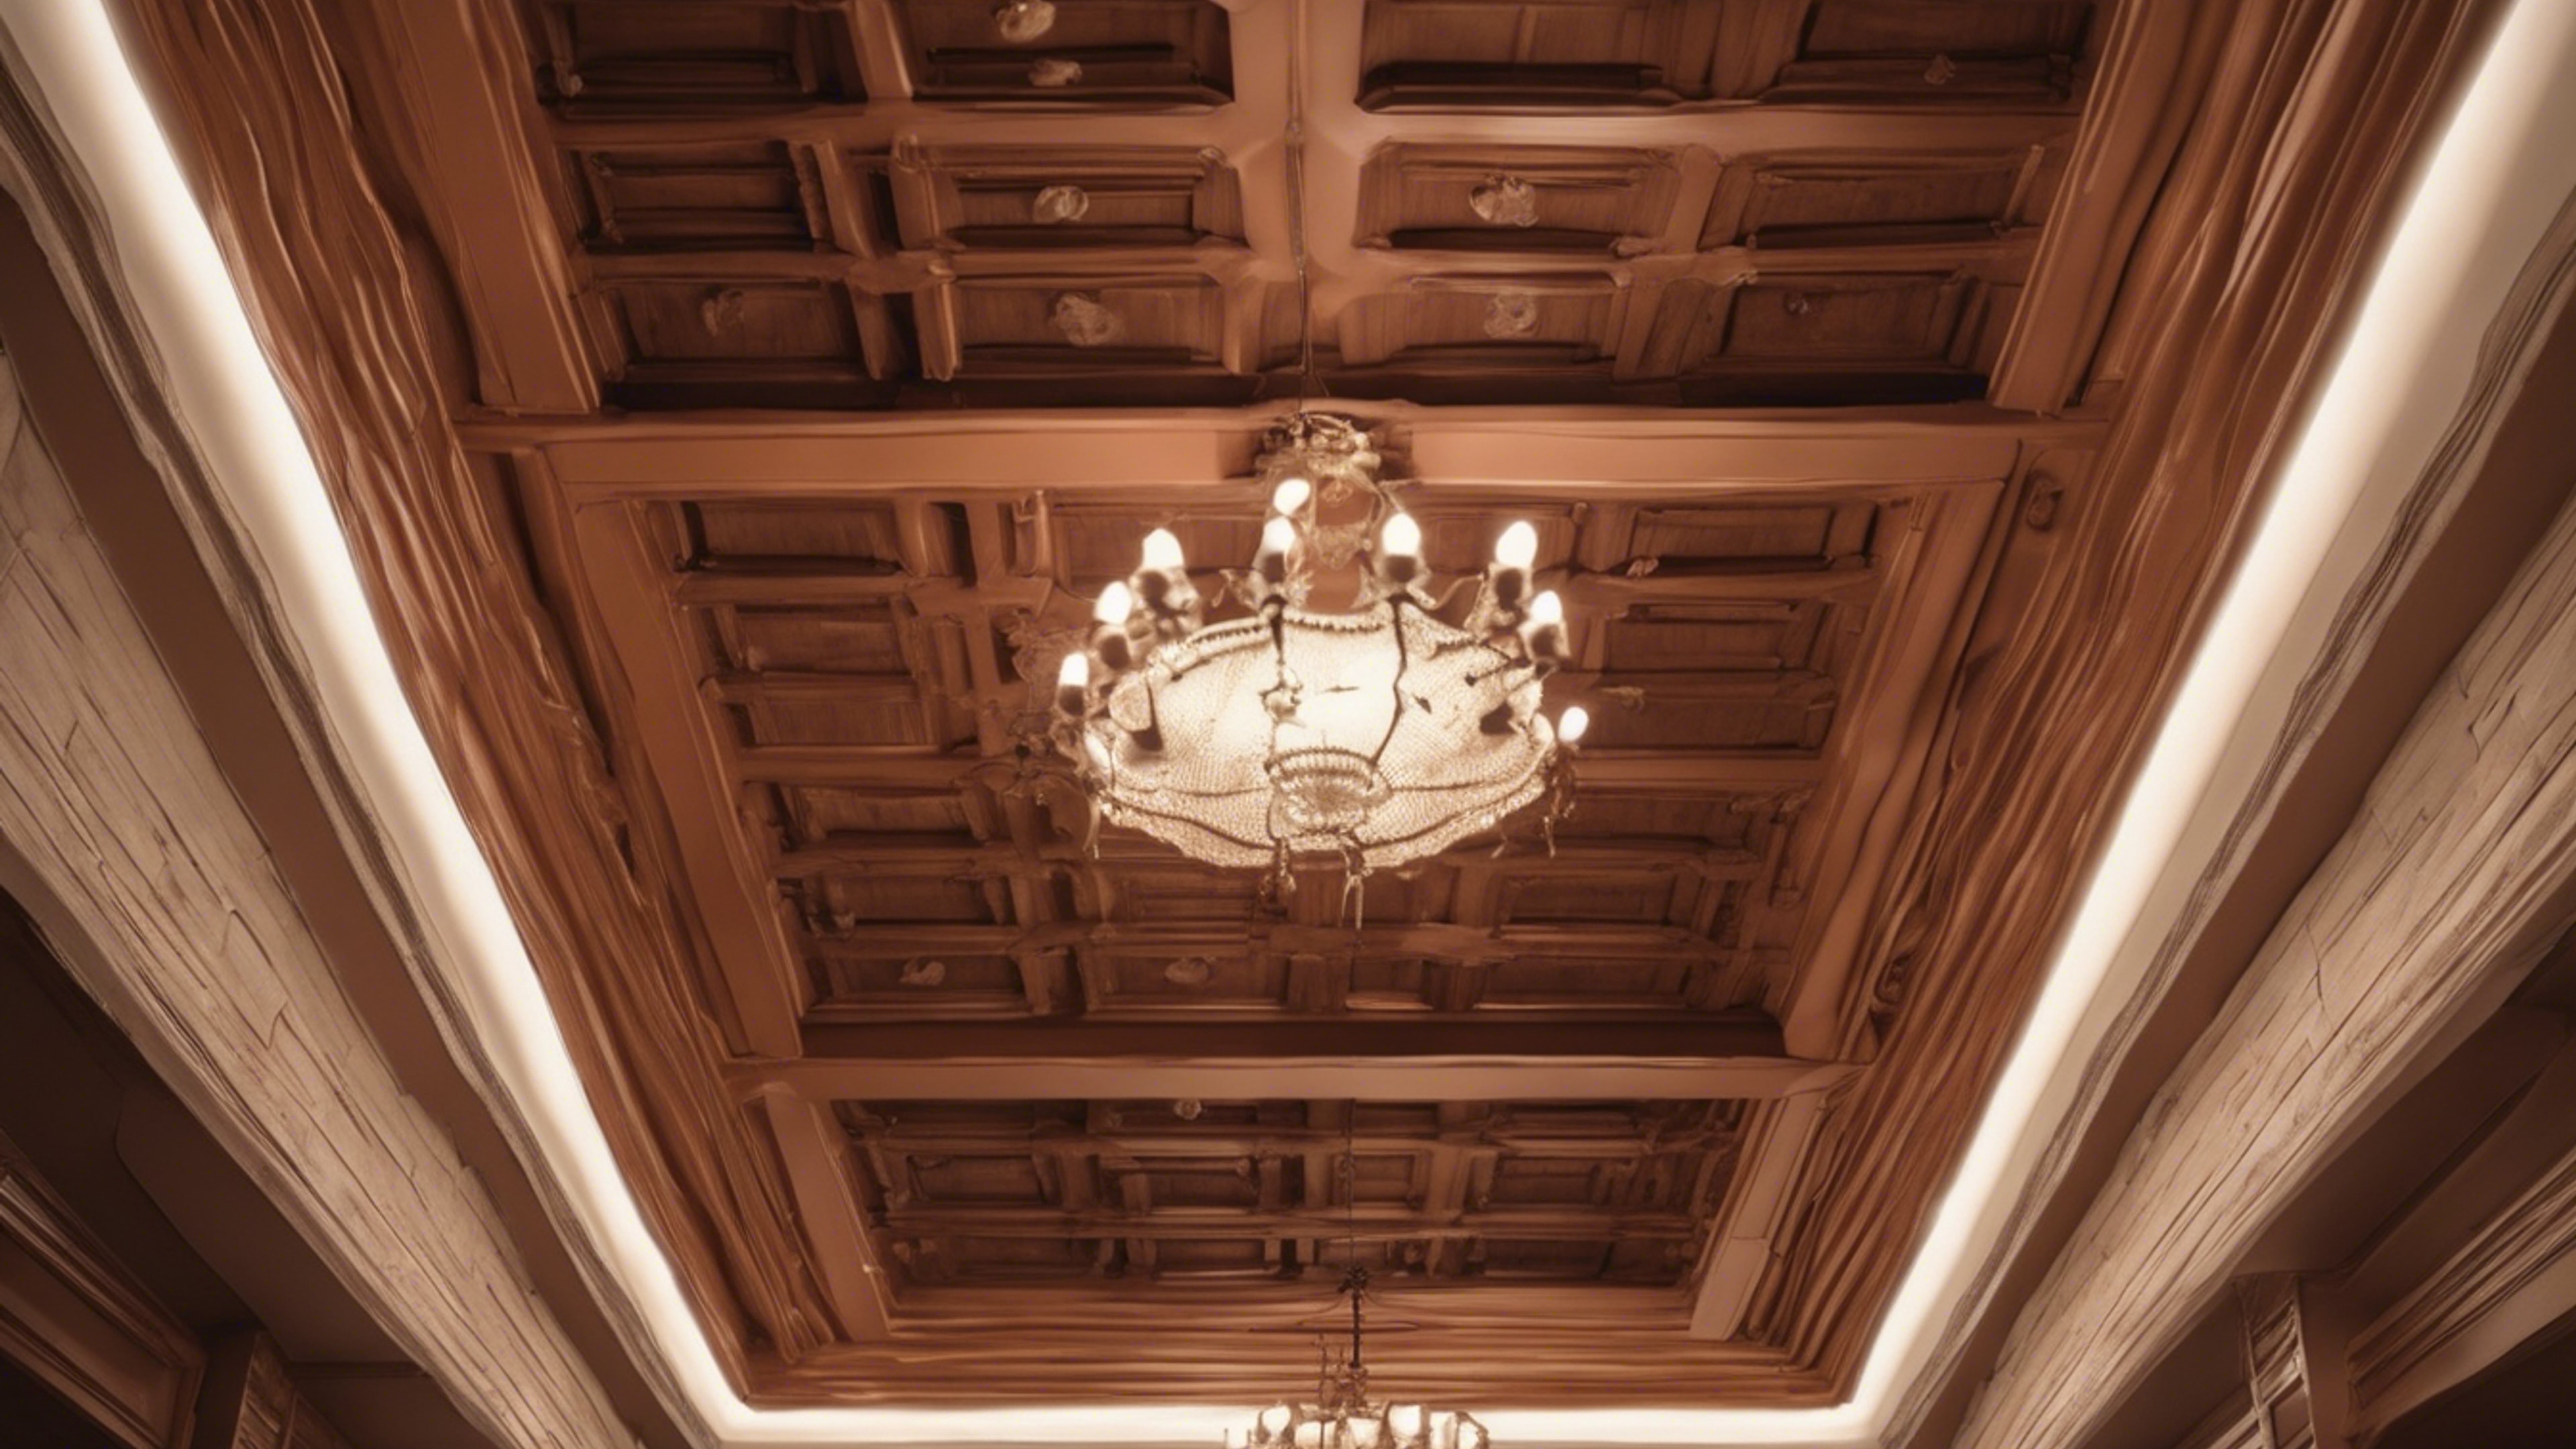 A warm brown coffered ceiling room decorated in traditional style Шпалери[0b856da927b2485ba9d5]